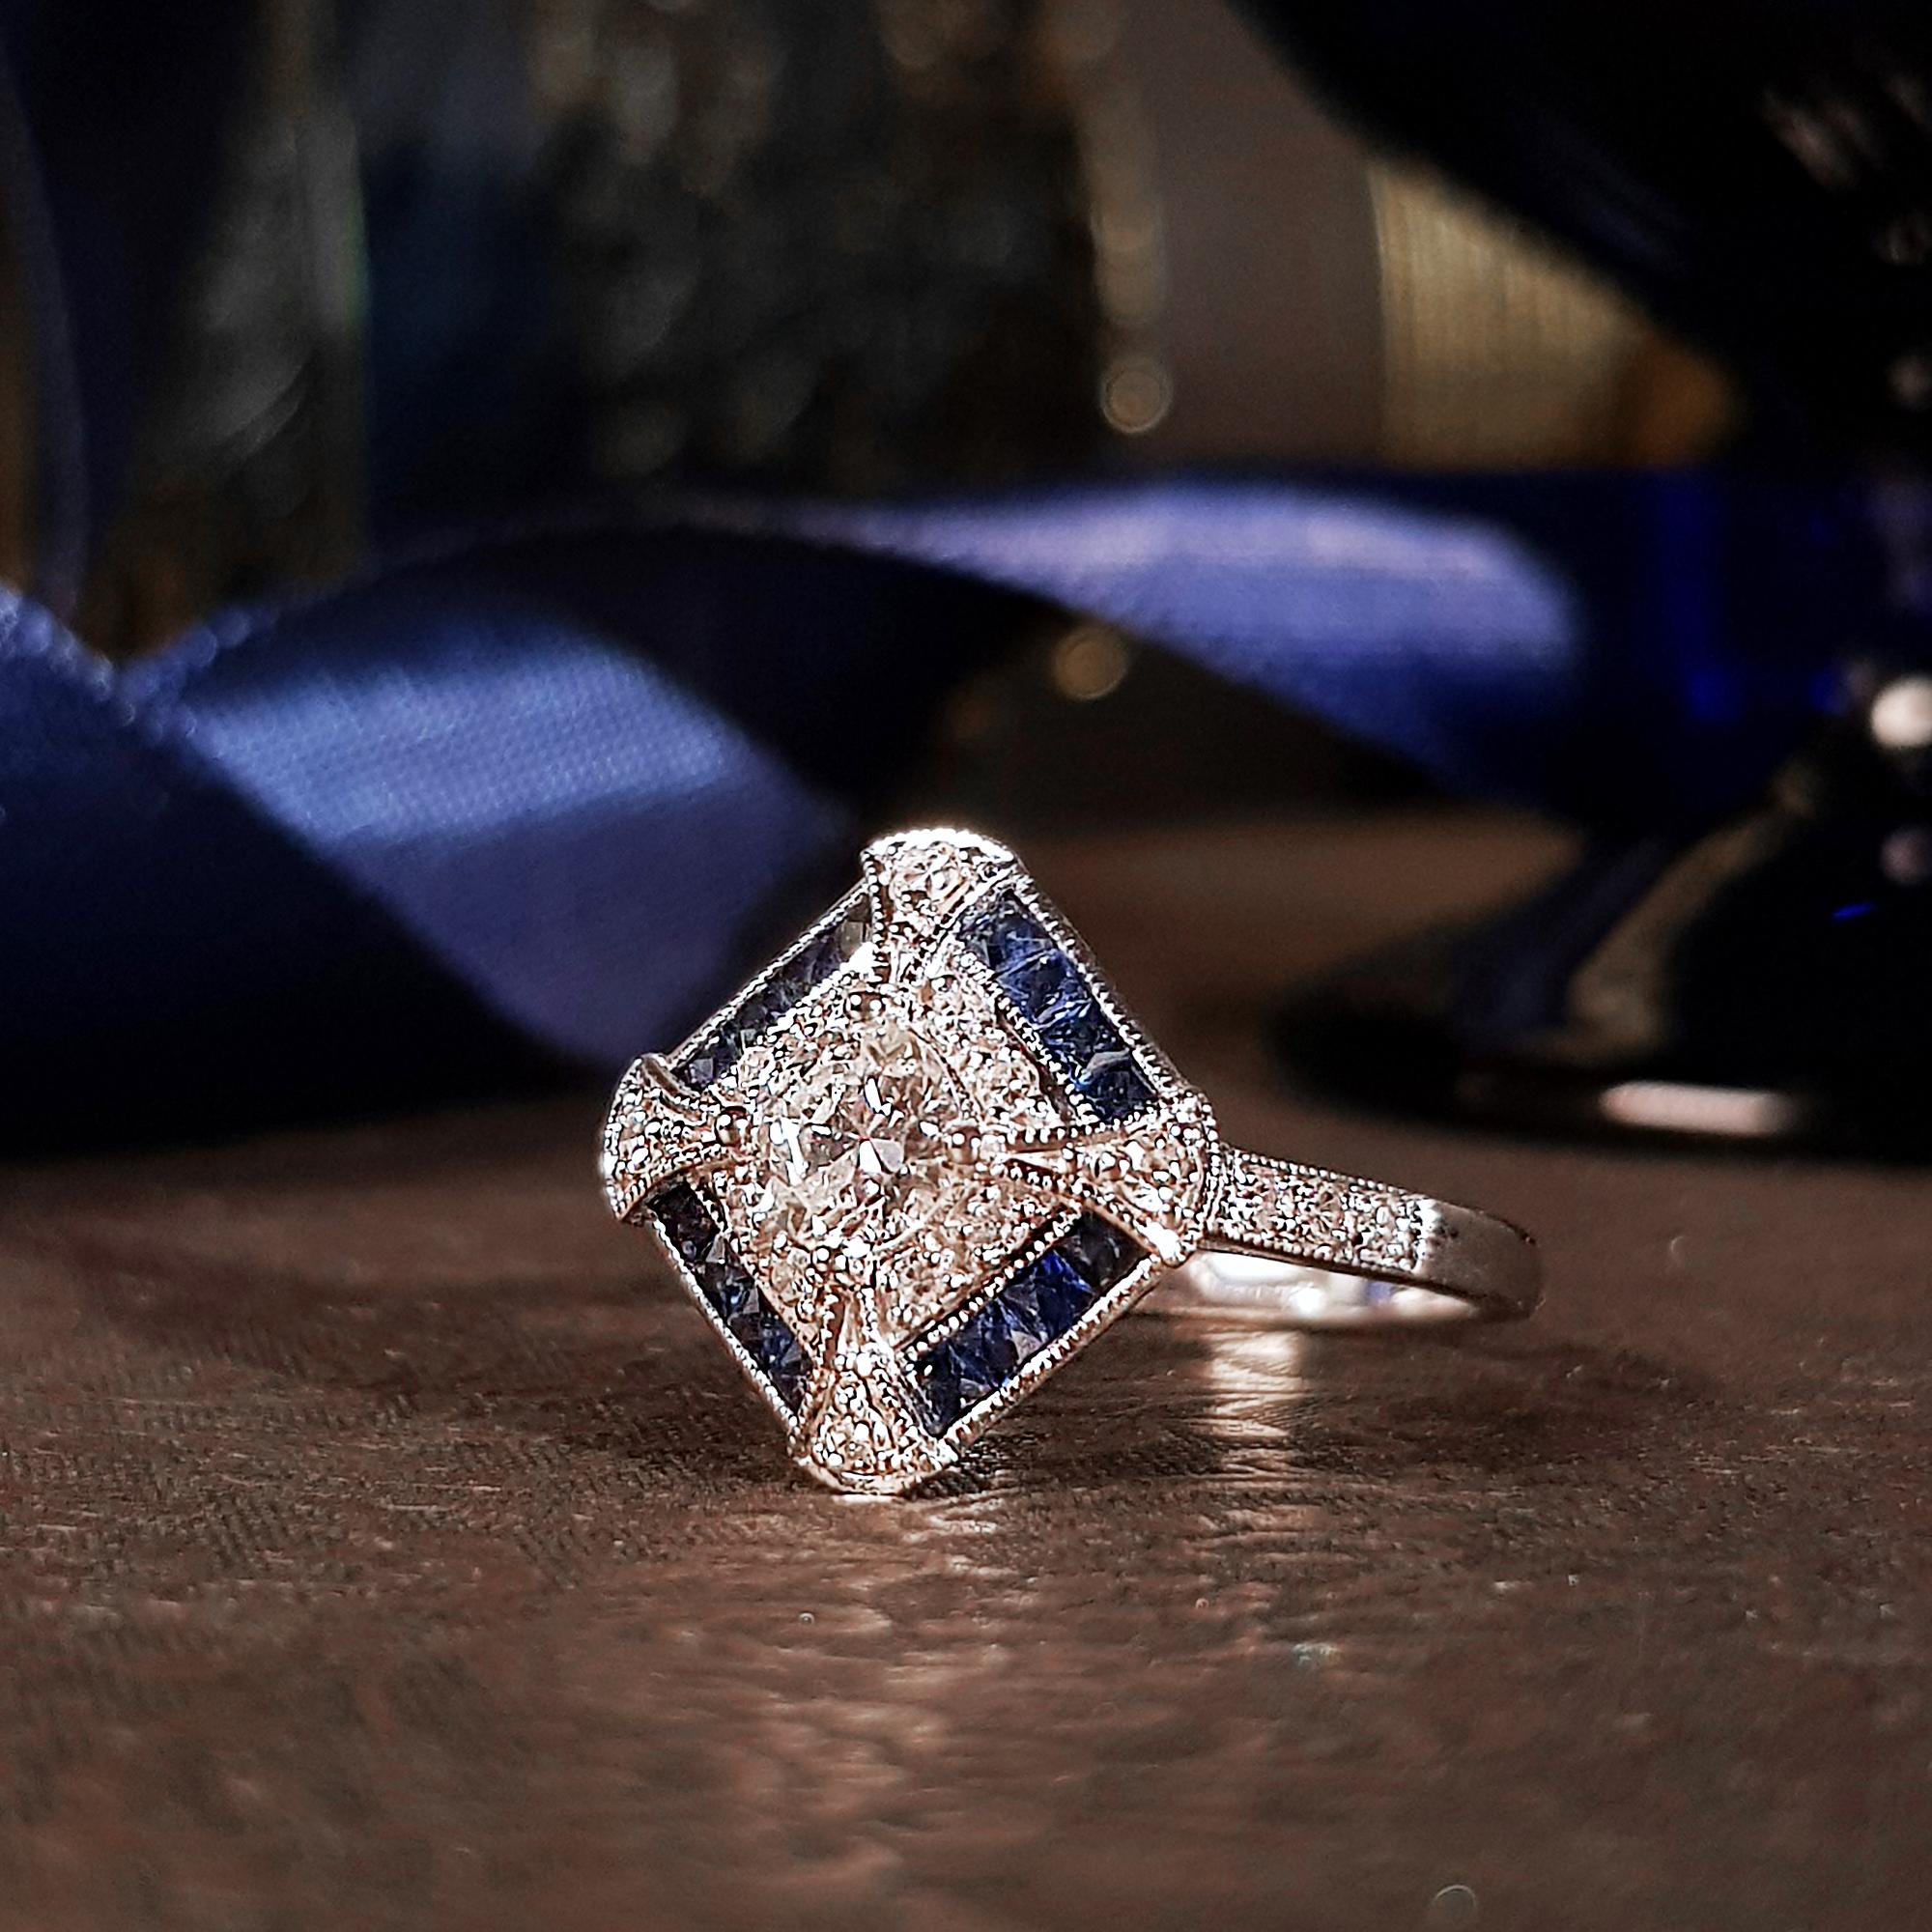 A fun ring with Art Deco inspire design. This 18k white gold diamond sapphire ring features old cut diamonds set in a square pattern, accented by single cut diamond and French cut sapphire and accented by fine milgrain detail. This is easy to wear